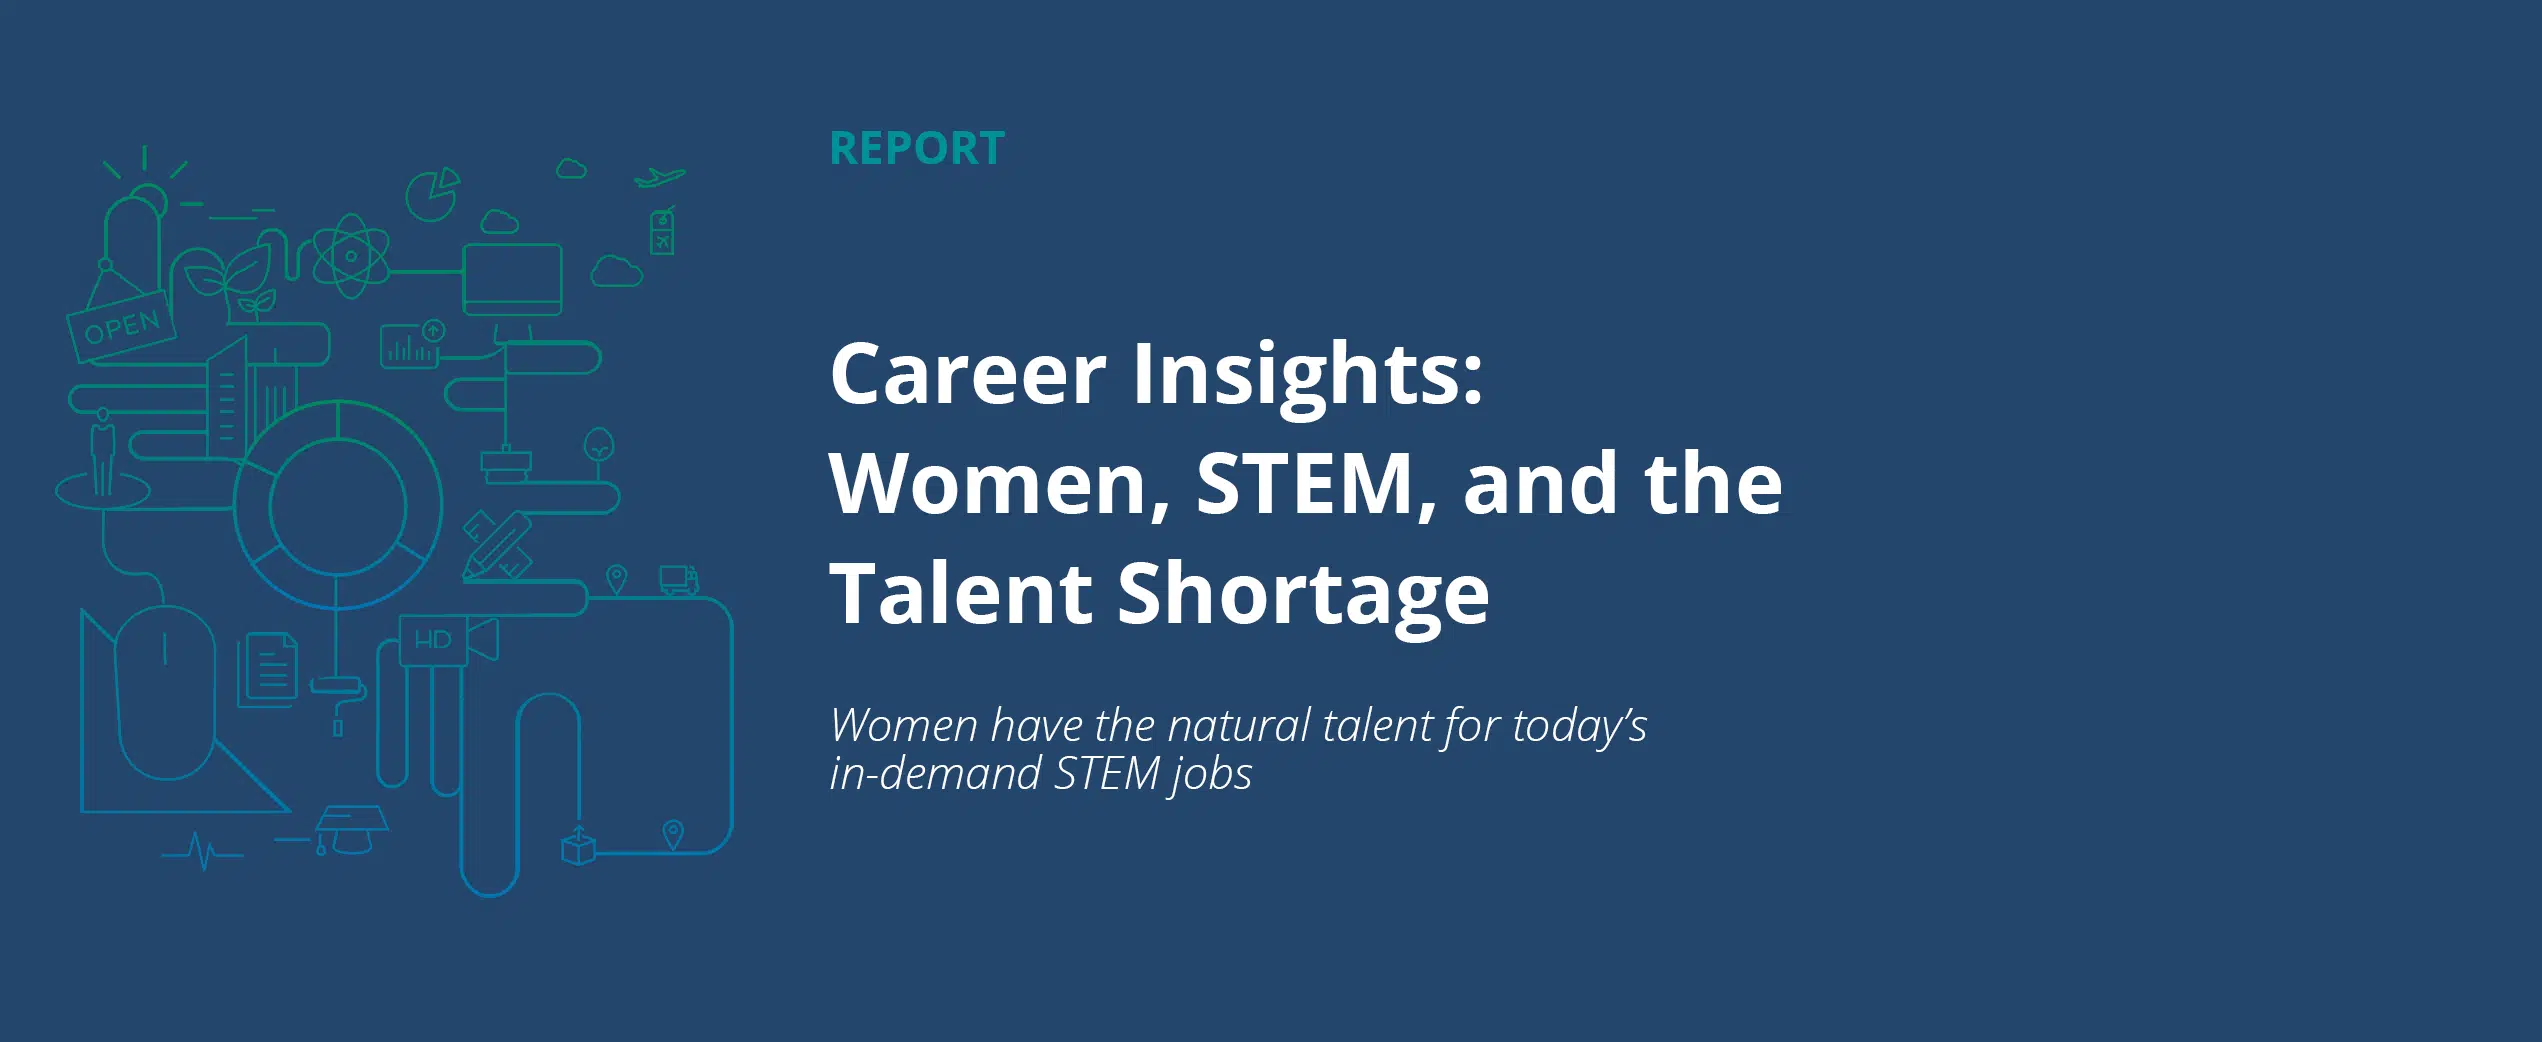 Career Insights: Women, STEM, and the Talent Shortage report